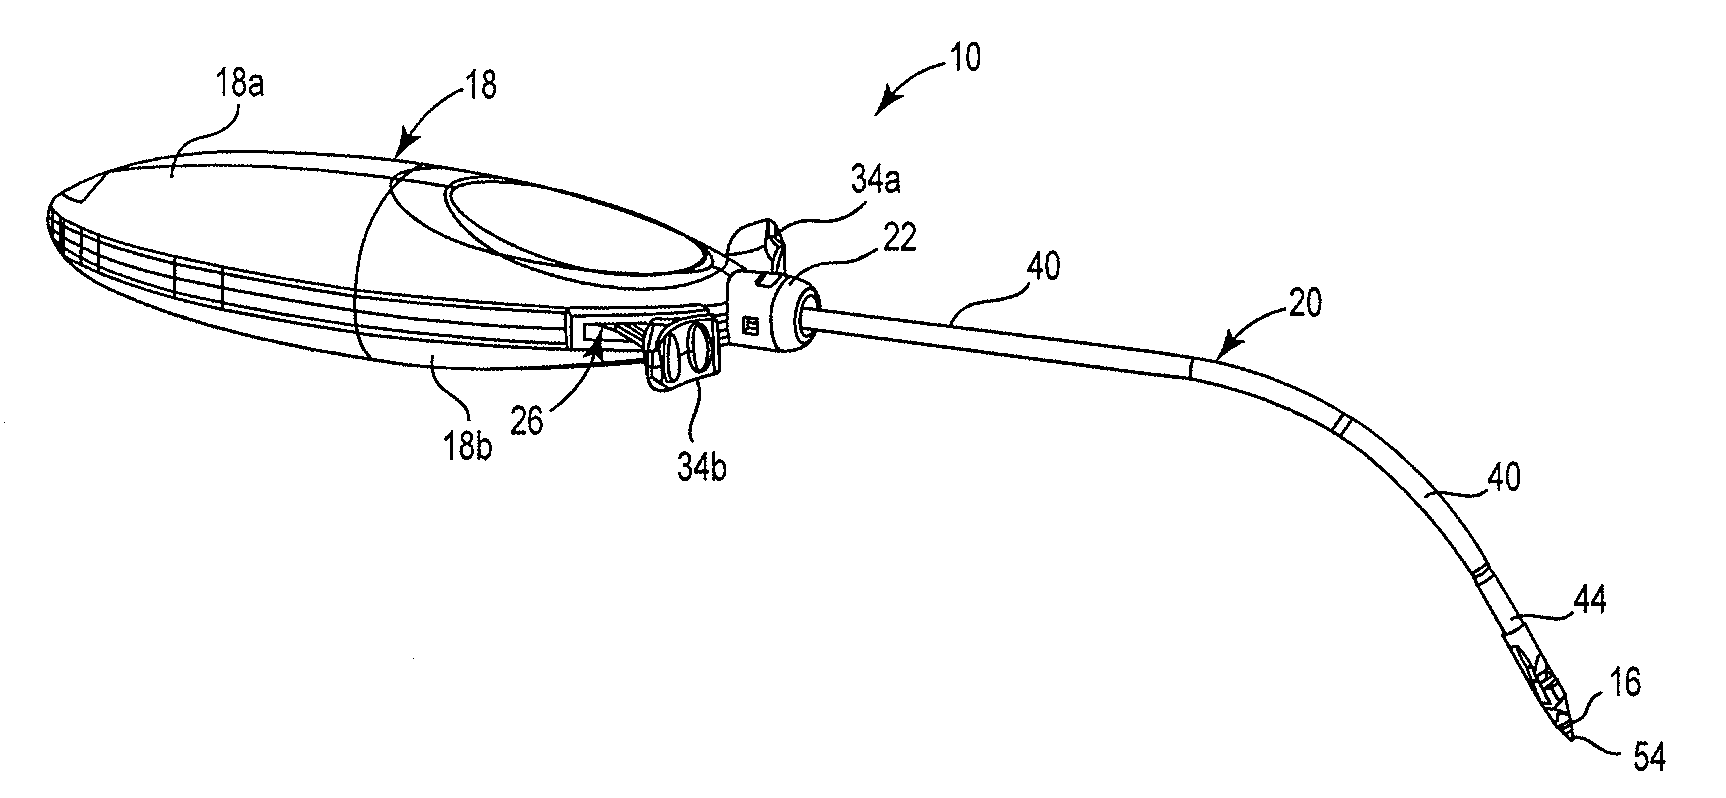 Surgical Needle Device